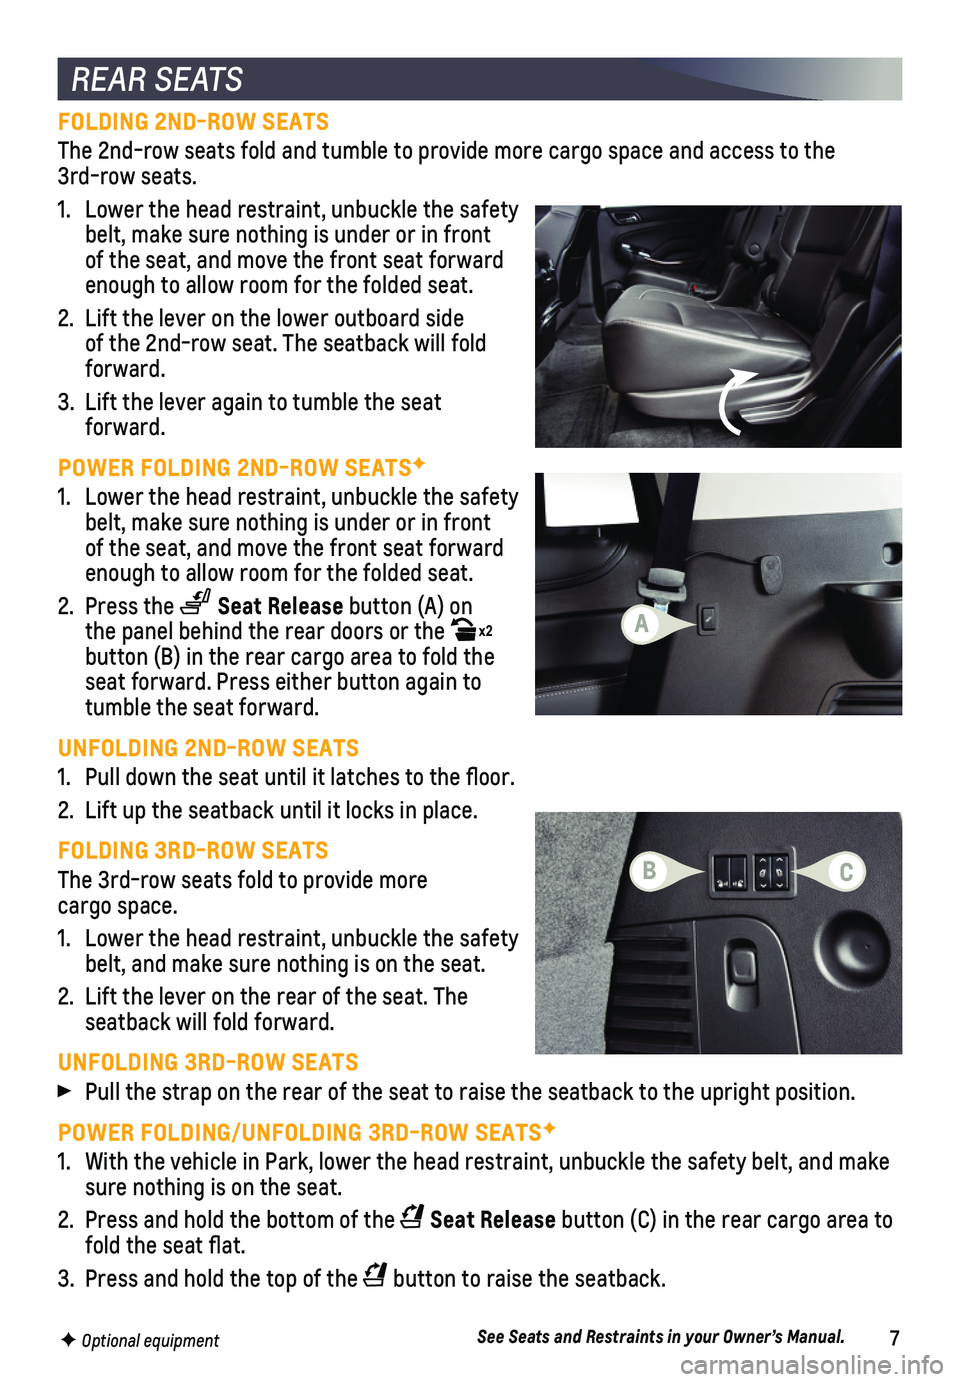 CHEVROLET SUBURBAN 2018  Get To Know Guide 7
FOLDING 2ND-ROW SEATS
The 2nd-row seats fold and tumble to provide more cargo space and access\
 to the  3rd-row seats.
1. Lower the head restraint, unbuckle the safety belt, make sure nothing is un